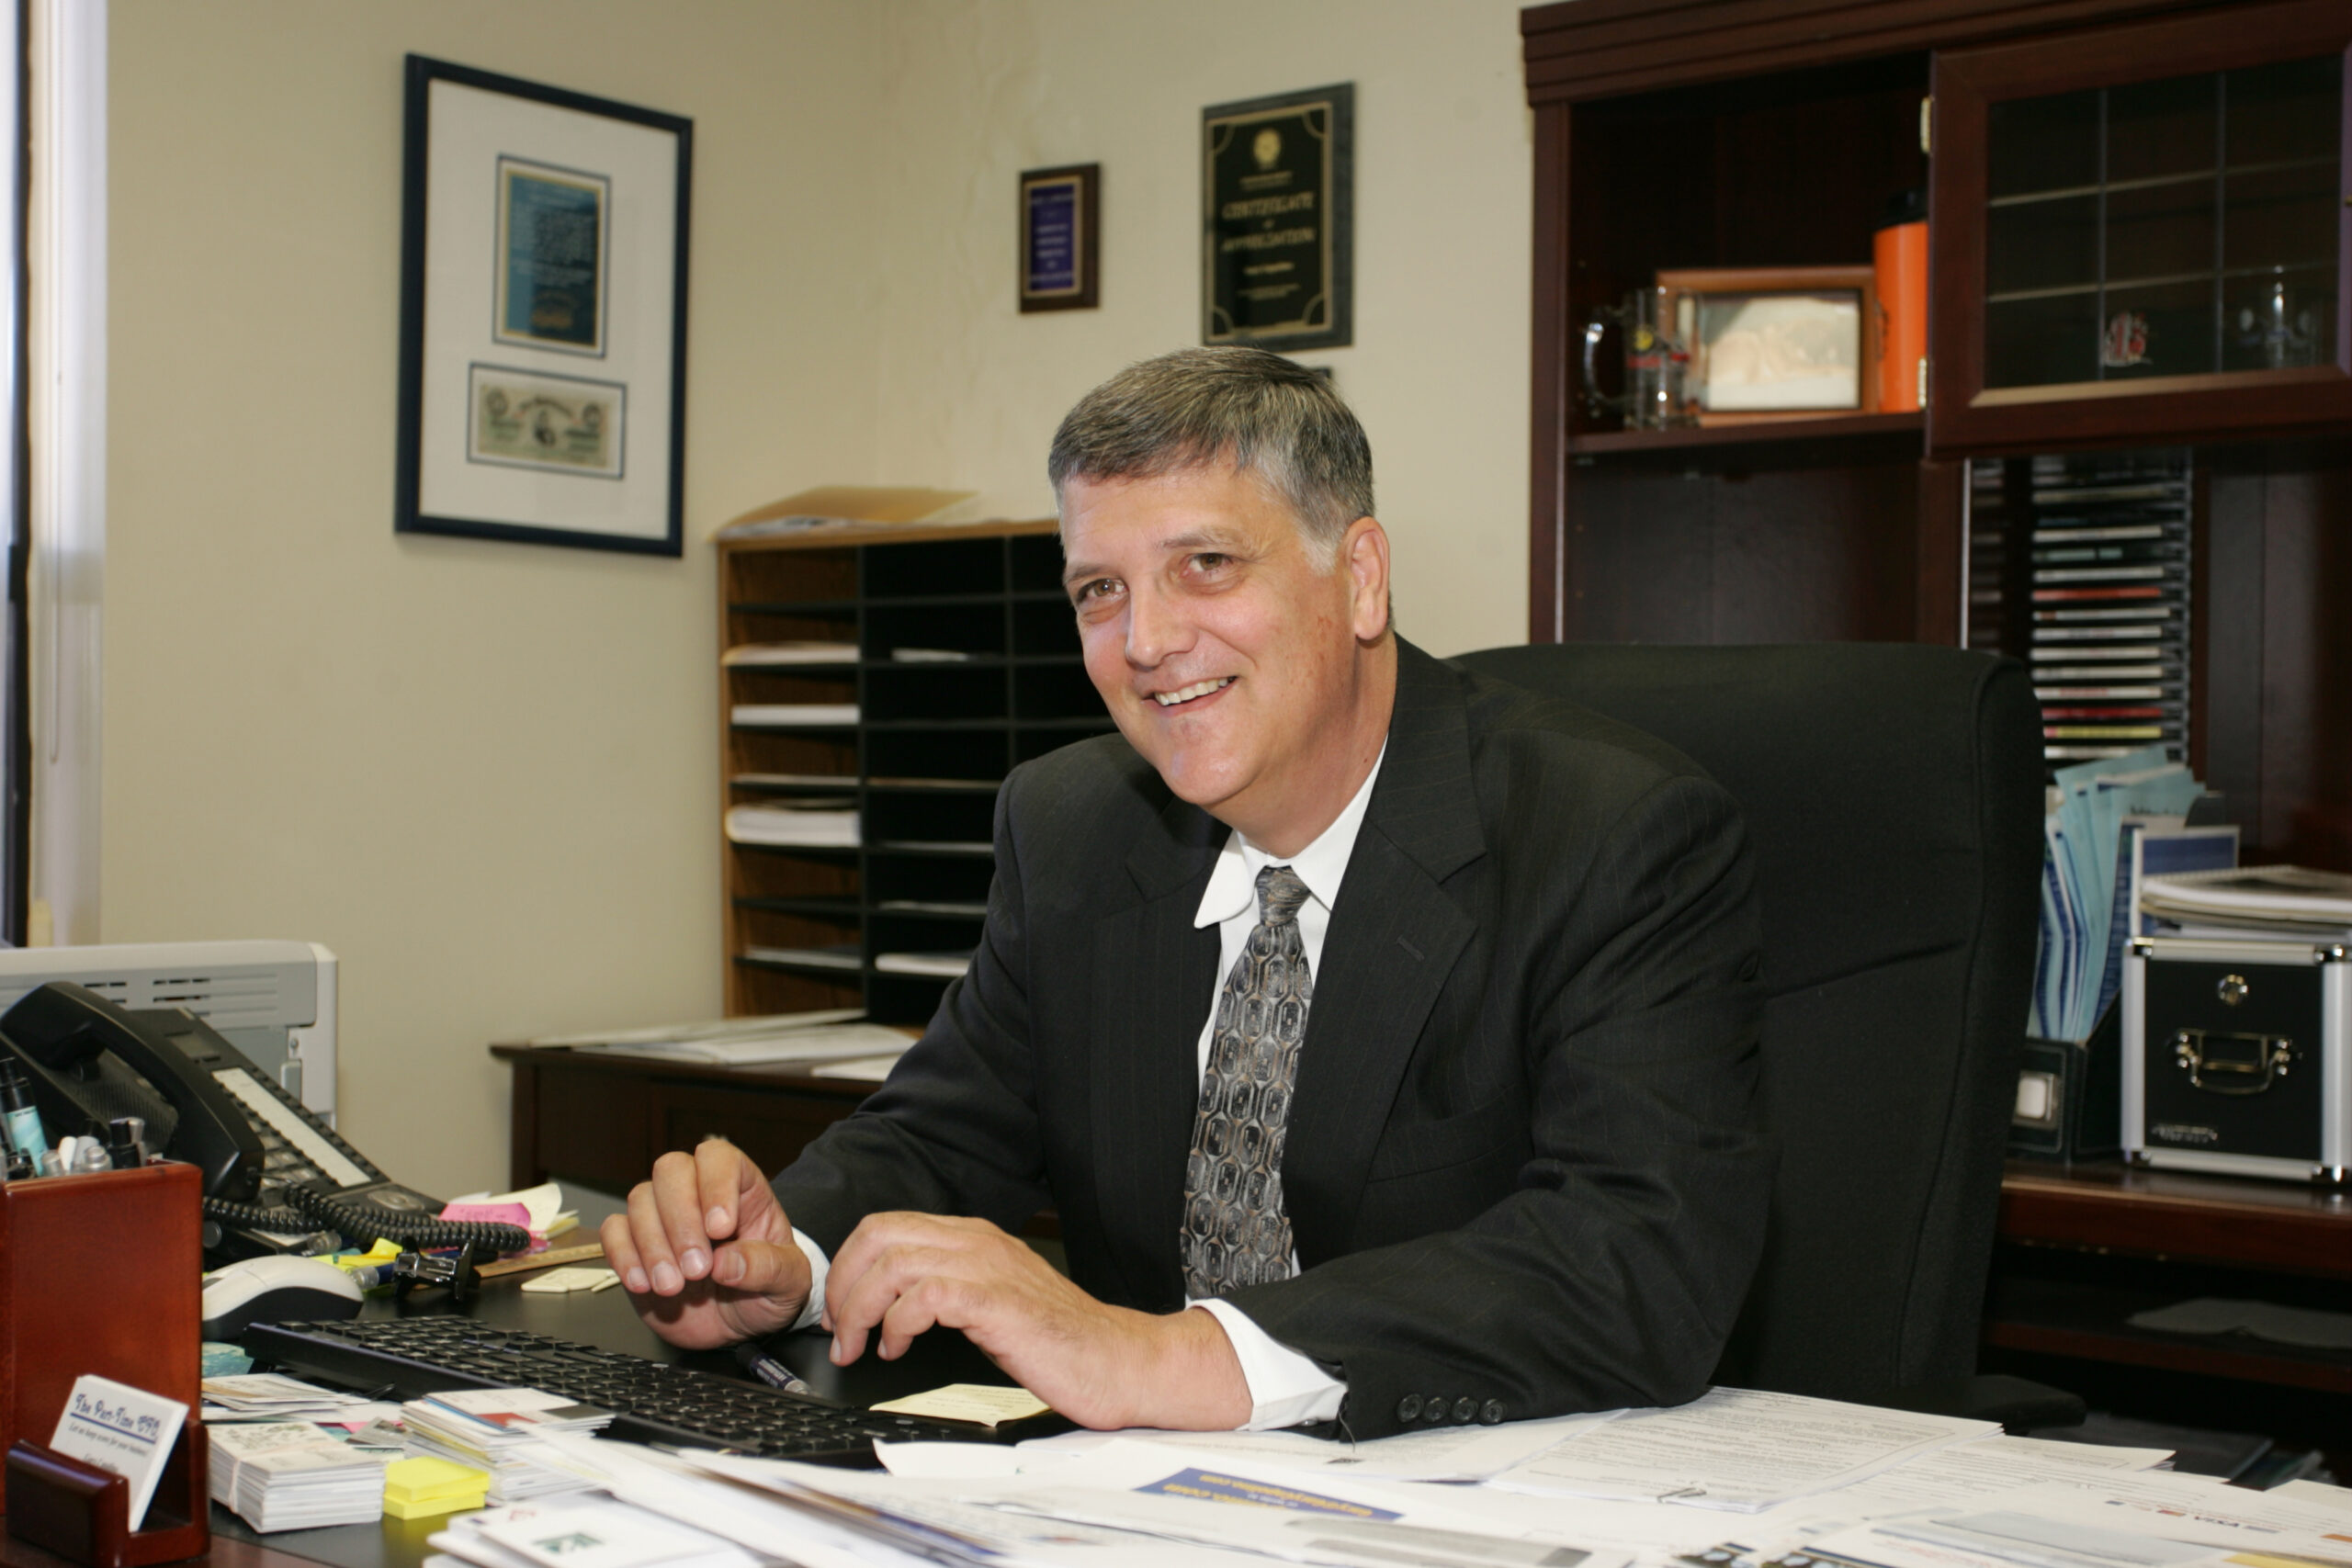 Gary Capolino working with a client's business accounting